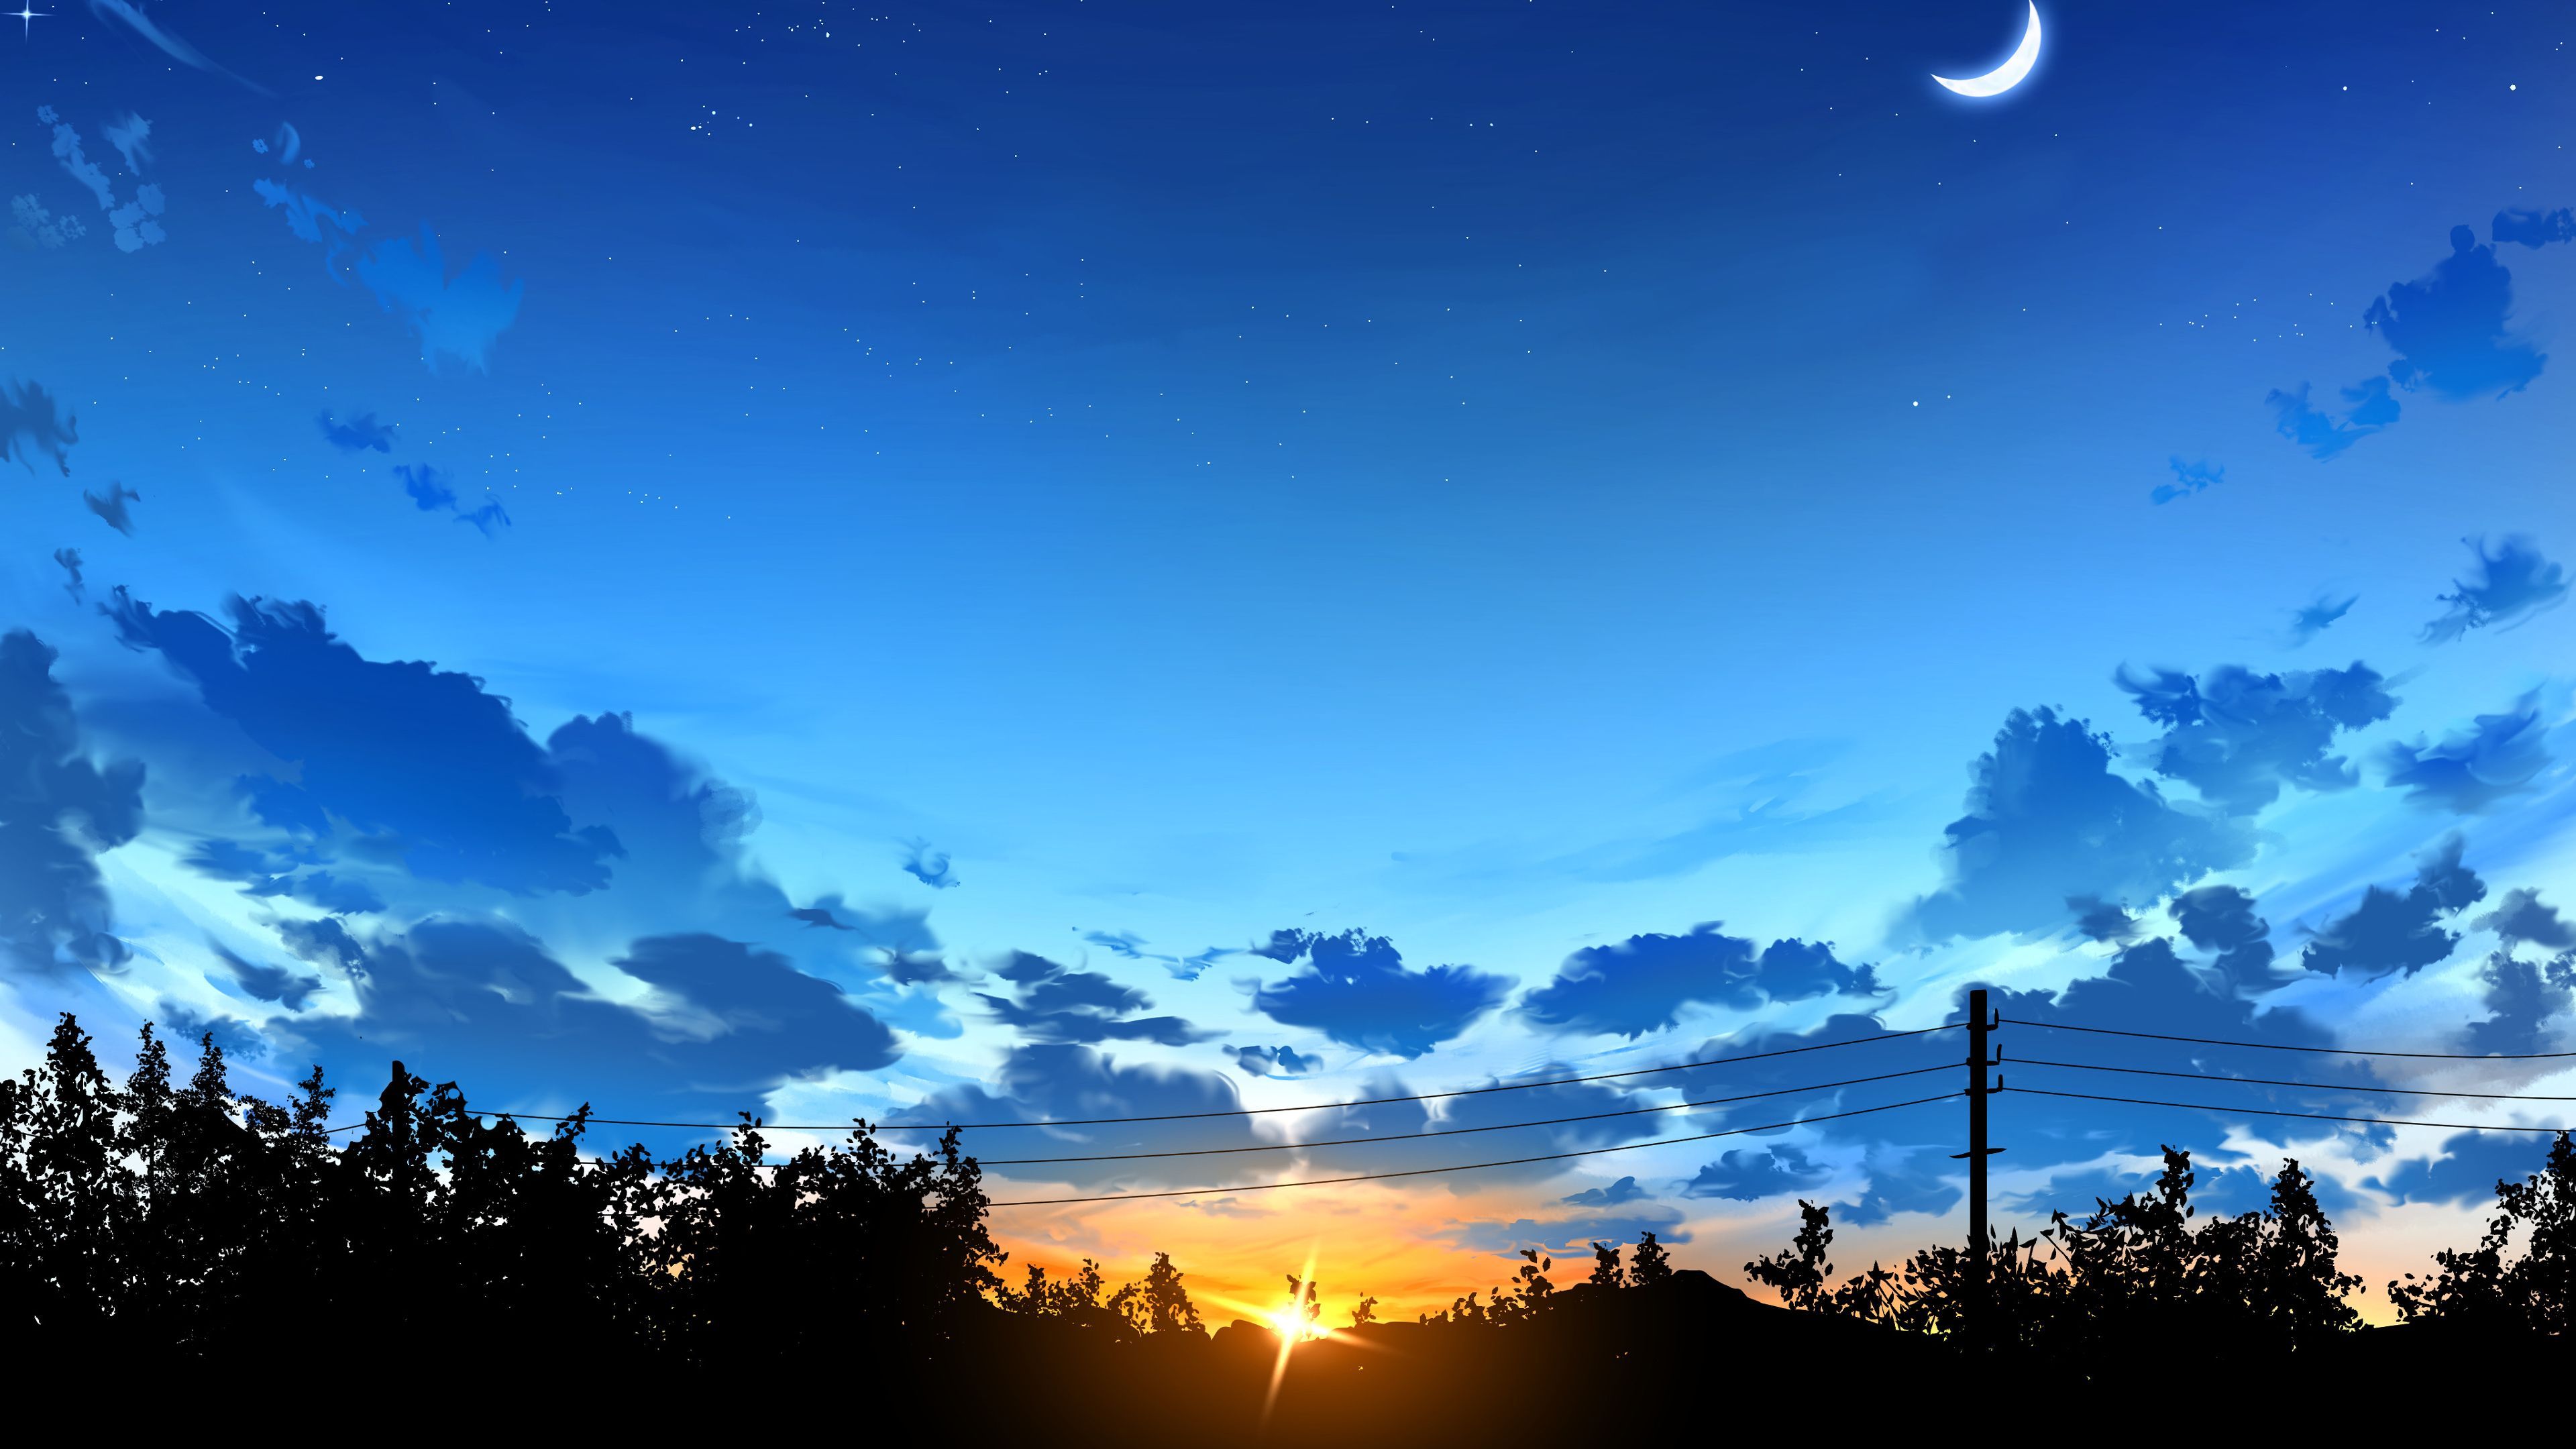 An image of a sunset with clouds and trees - Anime sunset